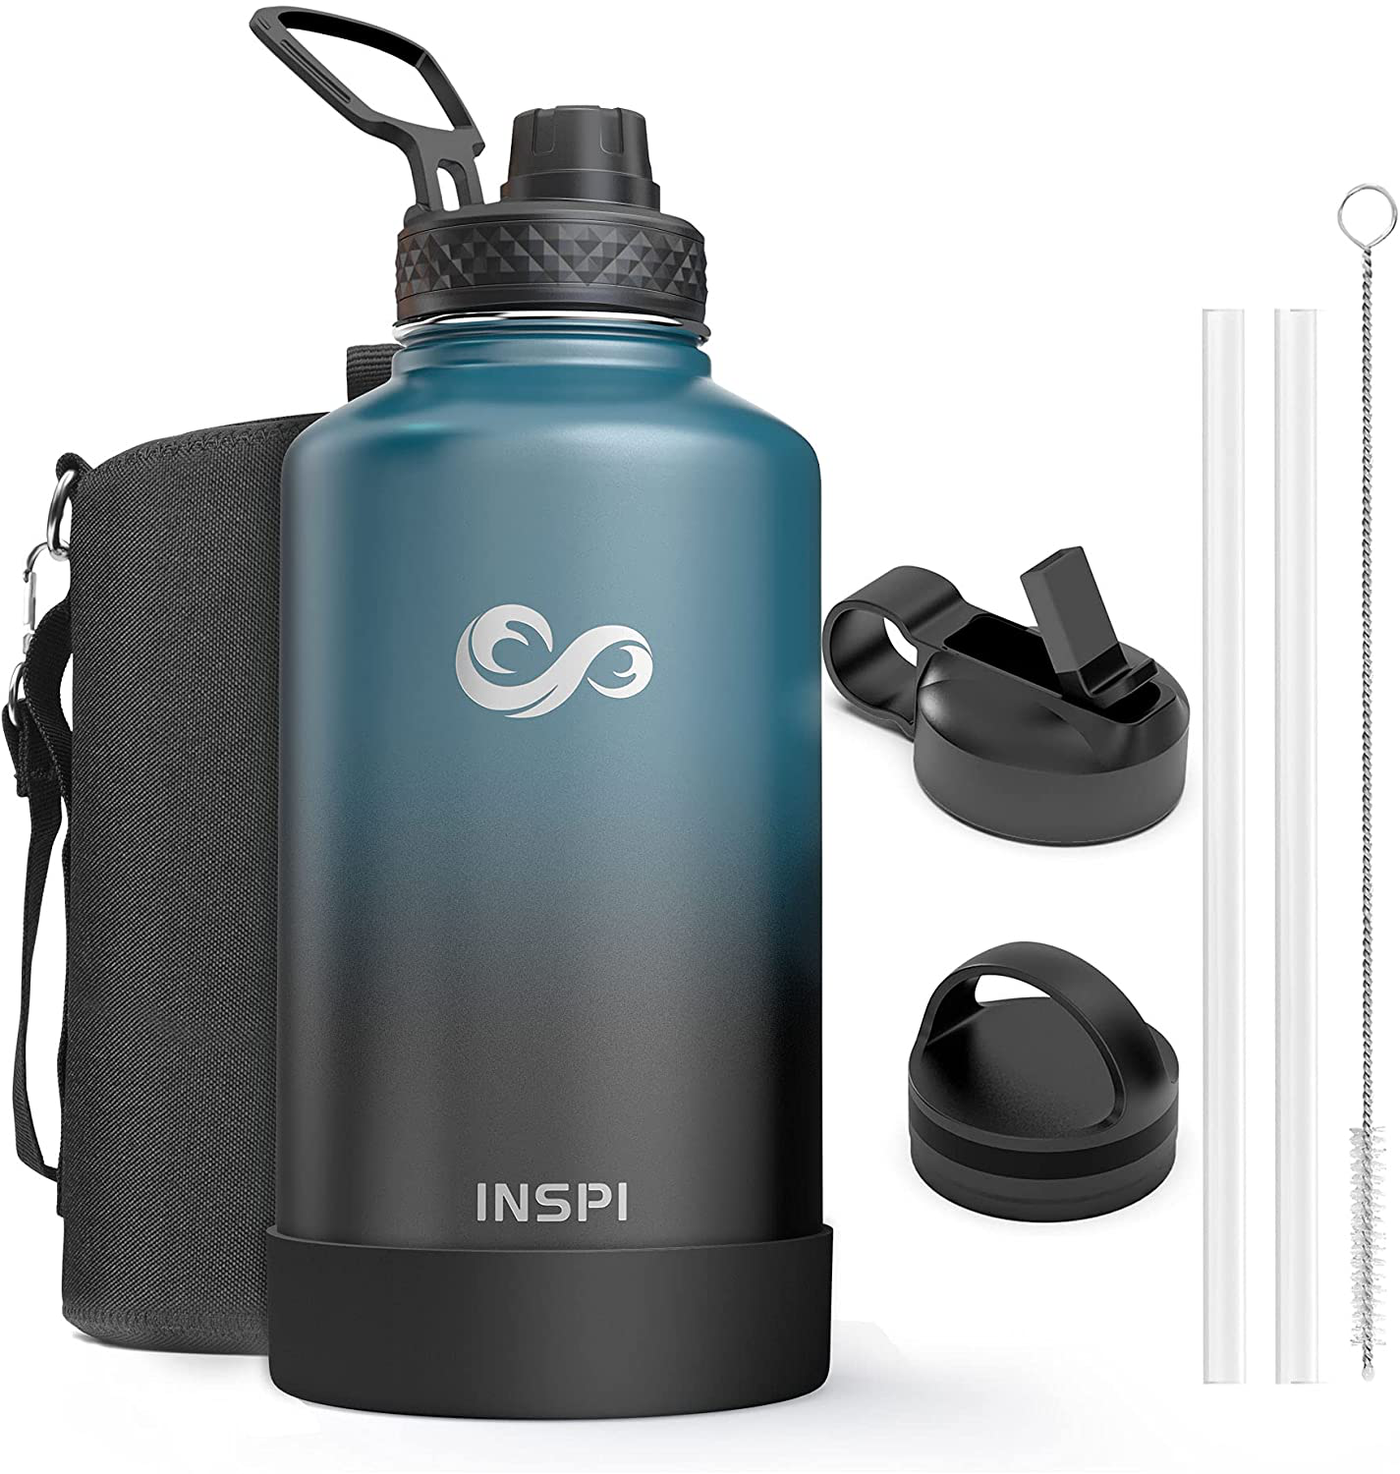 INSPI 64 oz Insulated Water Jug, Stainless Steel Water Bottle with Straw Spout Handle Lid, Double Wall Vacuum Water Flask, Sweat-proof Leak Proof Thermo Keep Beverages Cold or Hot, Indigo Black Ombre